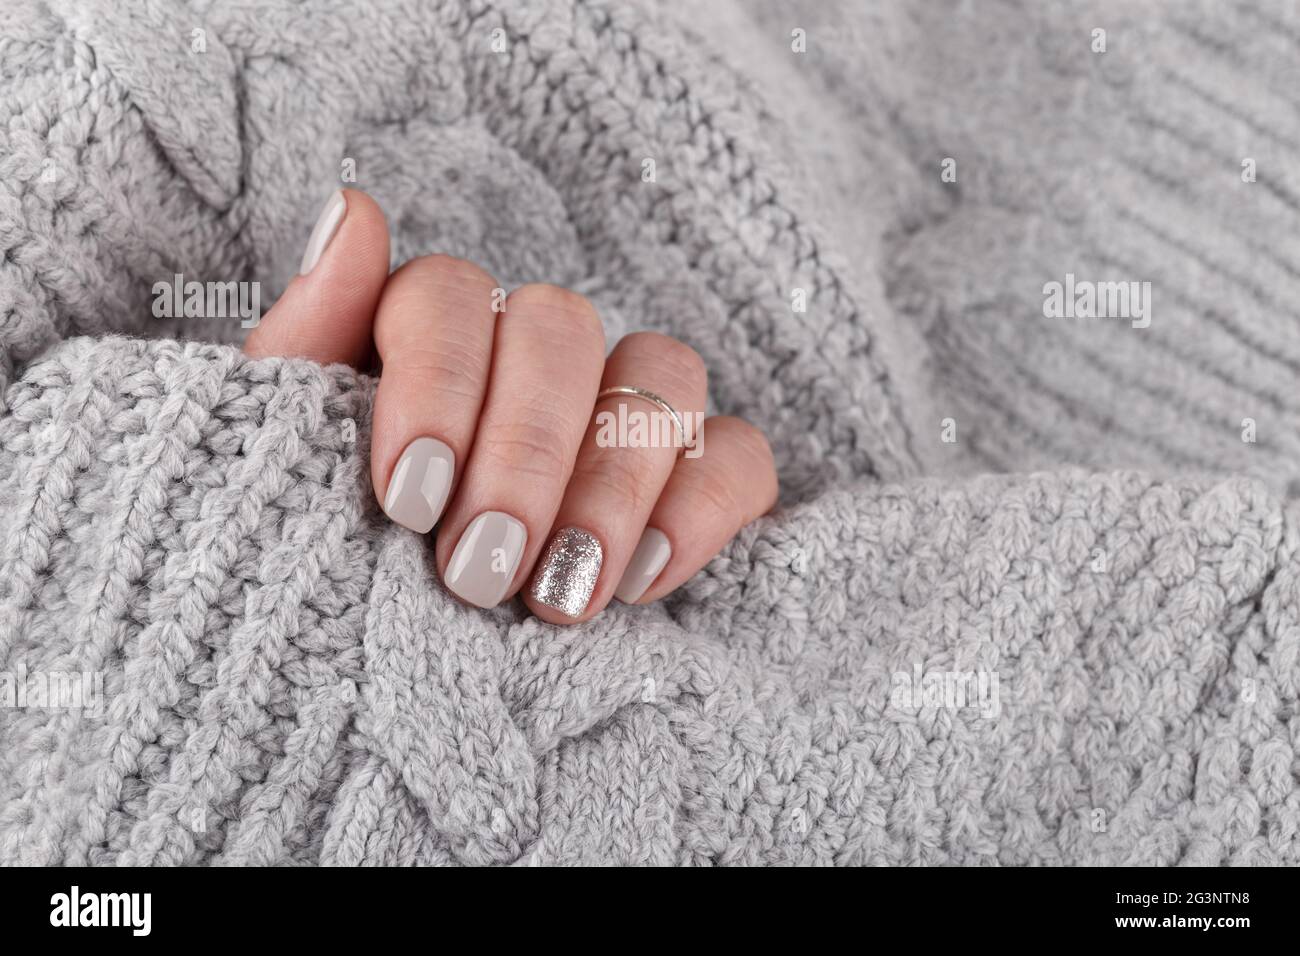 Manicured woman hands Stock Photo